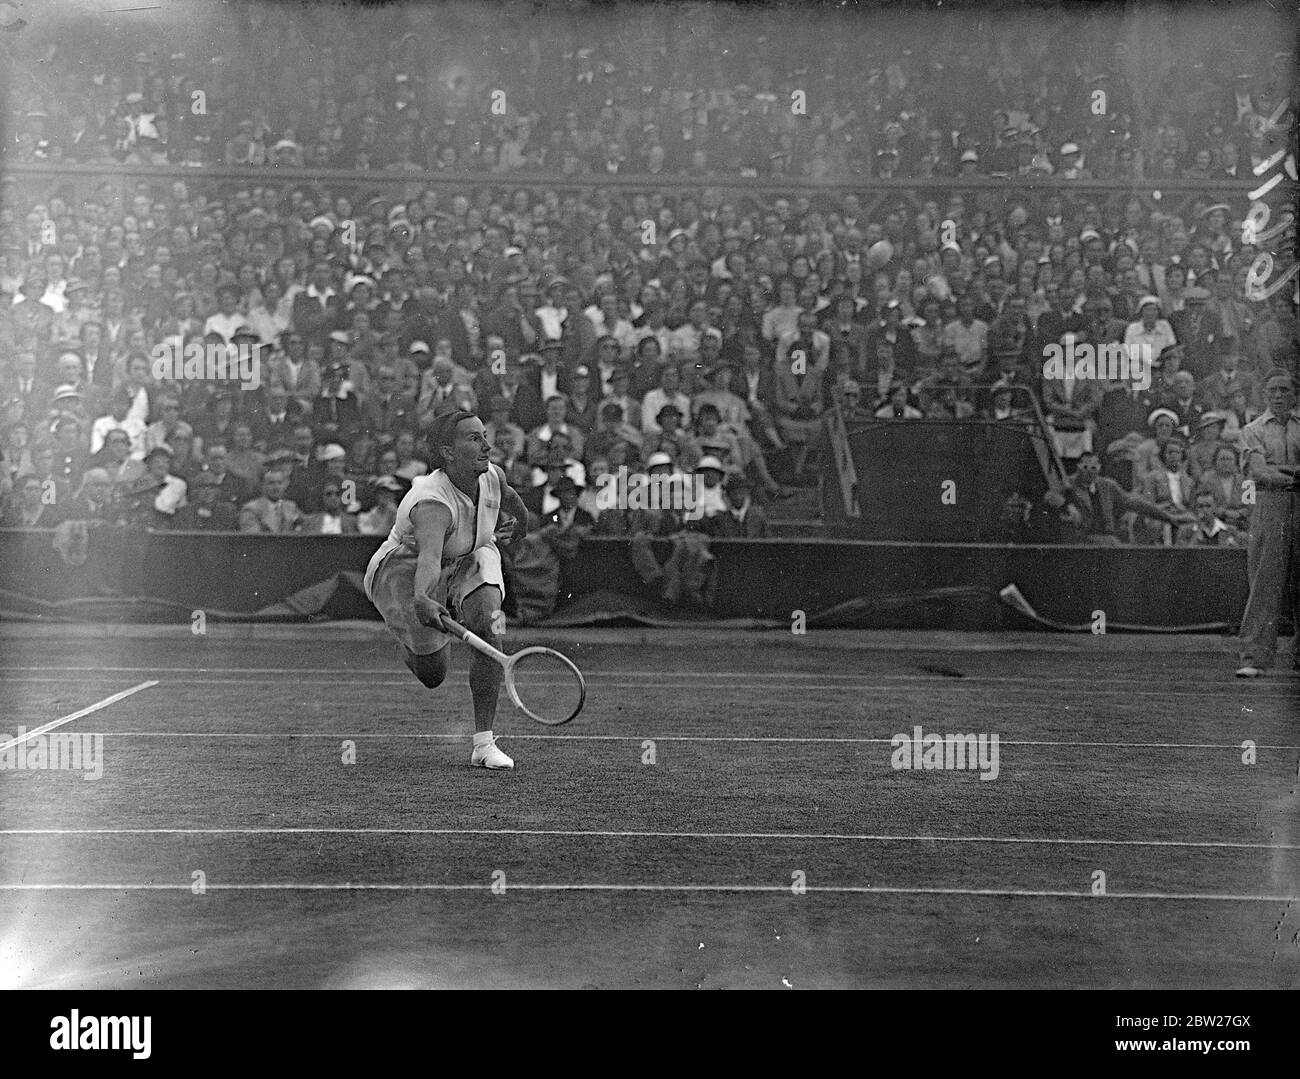 Miss Dorothy Round of Great Britain in play against Mme R. Mathieu, whom she beat 6 - 3, 6 - 0 in the semi-final of the women's singles on the Centre Court at Wimbledon. She will now meet Mme J. Jedrzejowska of Polland in the final. 1 July 1937 Stock Photo